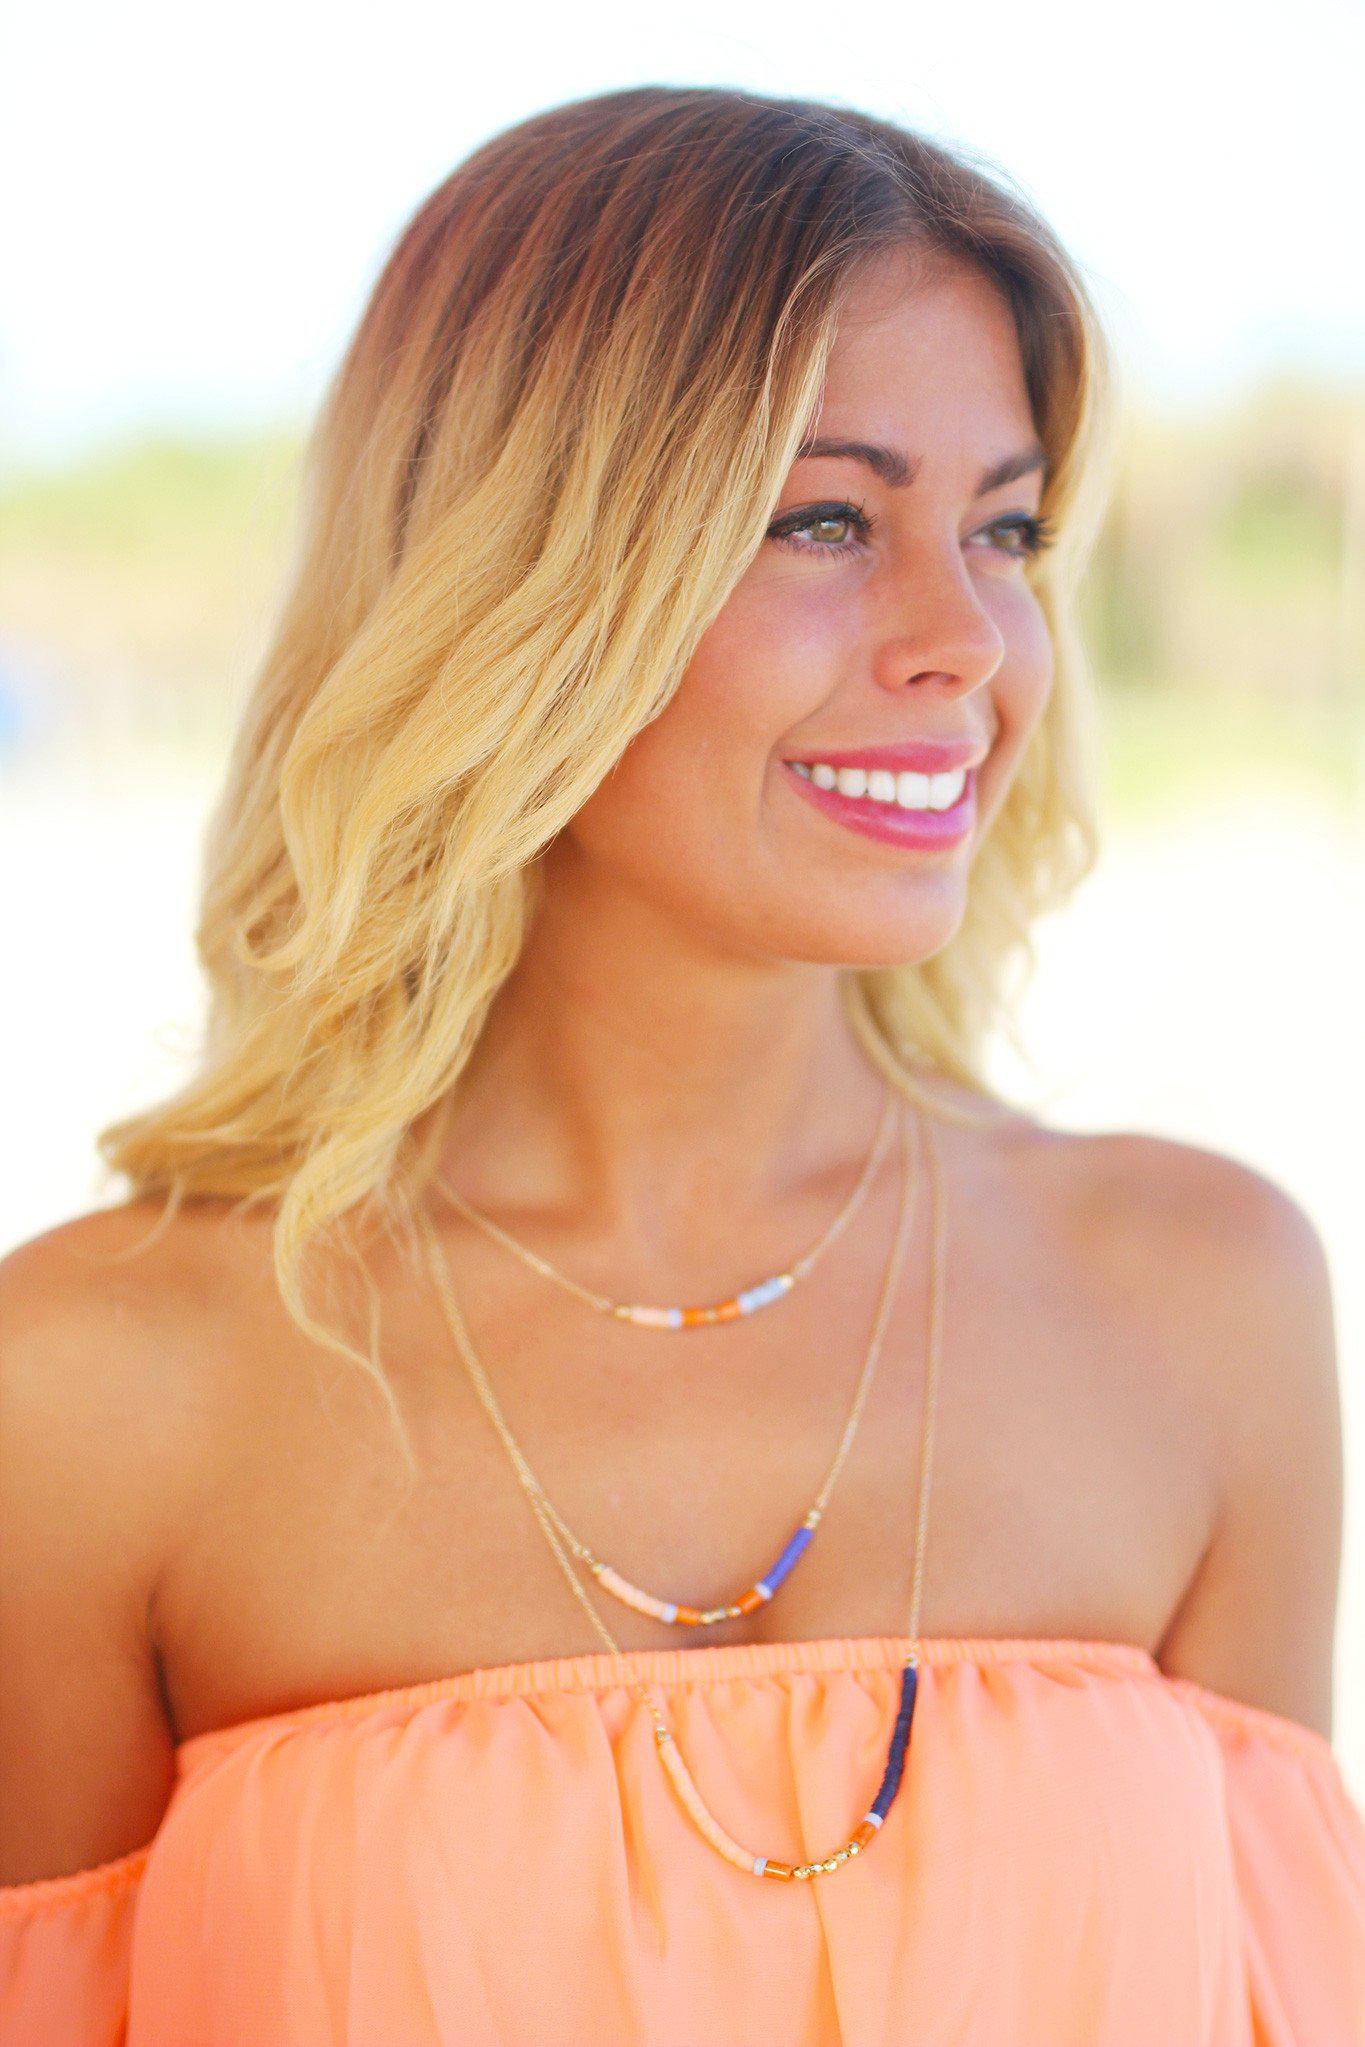 Coral Layered Necklace